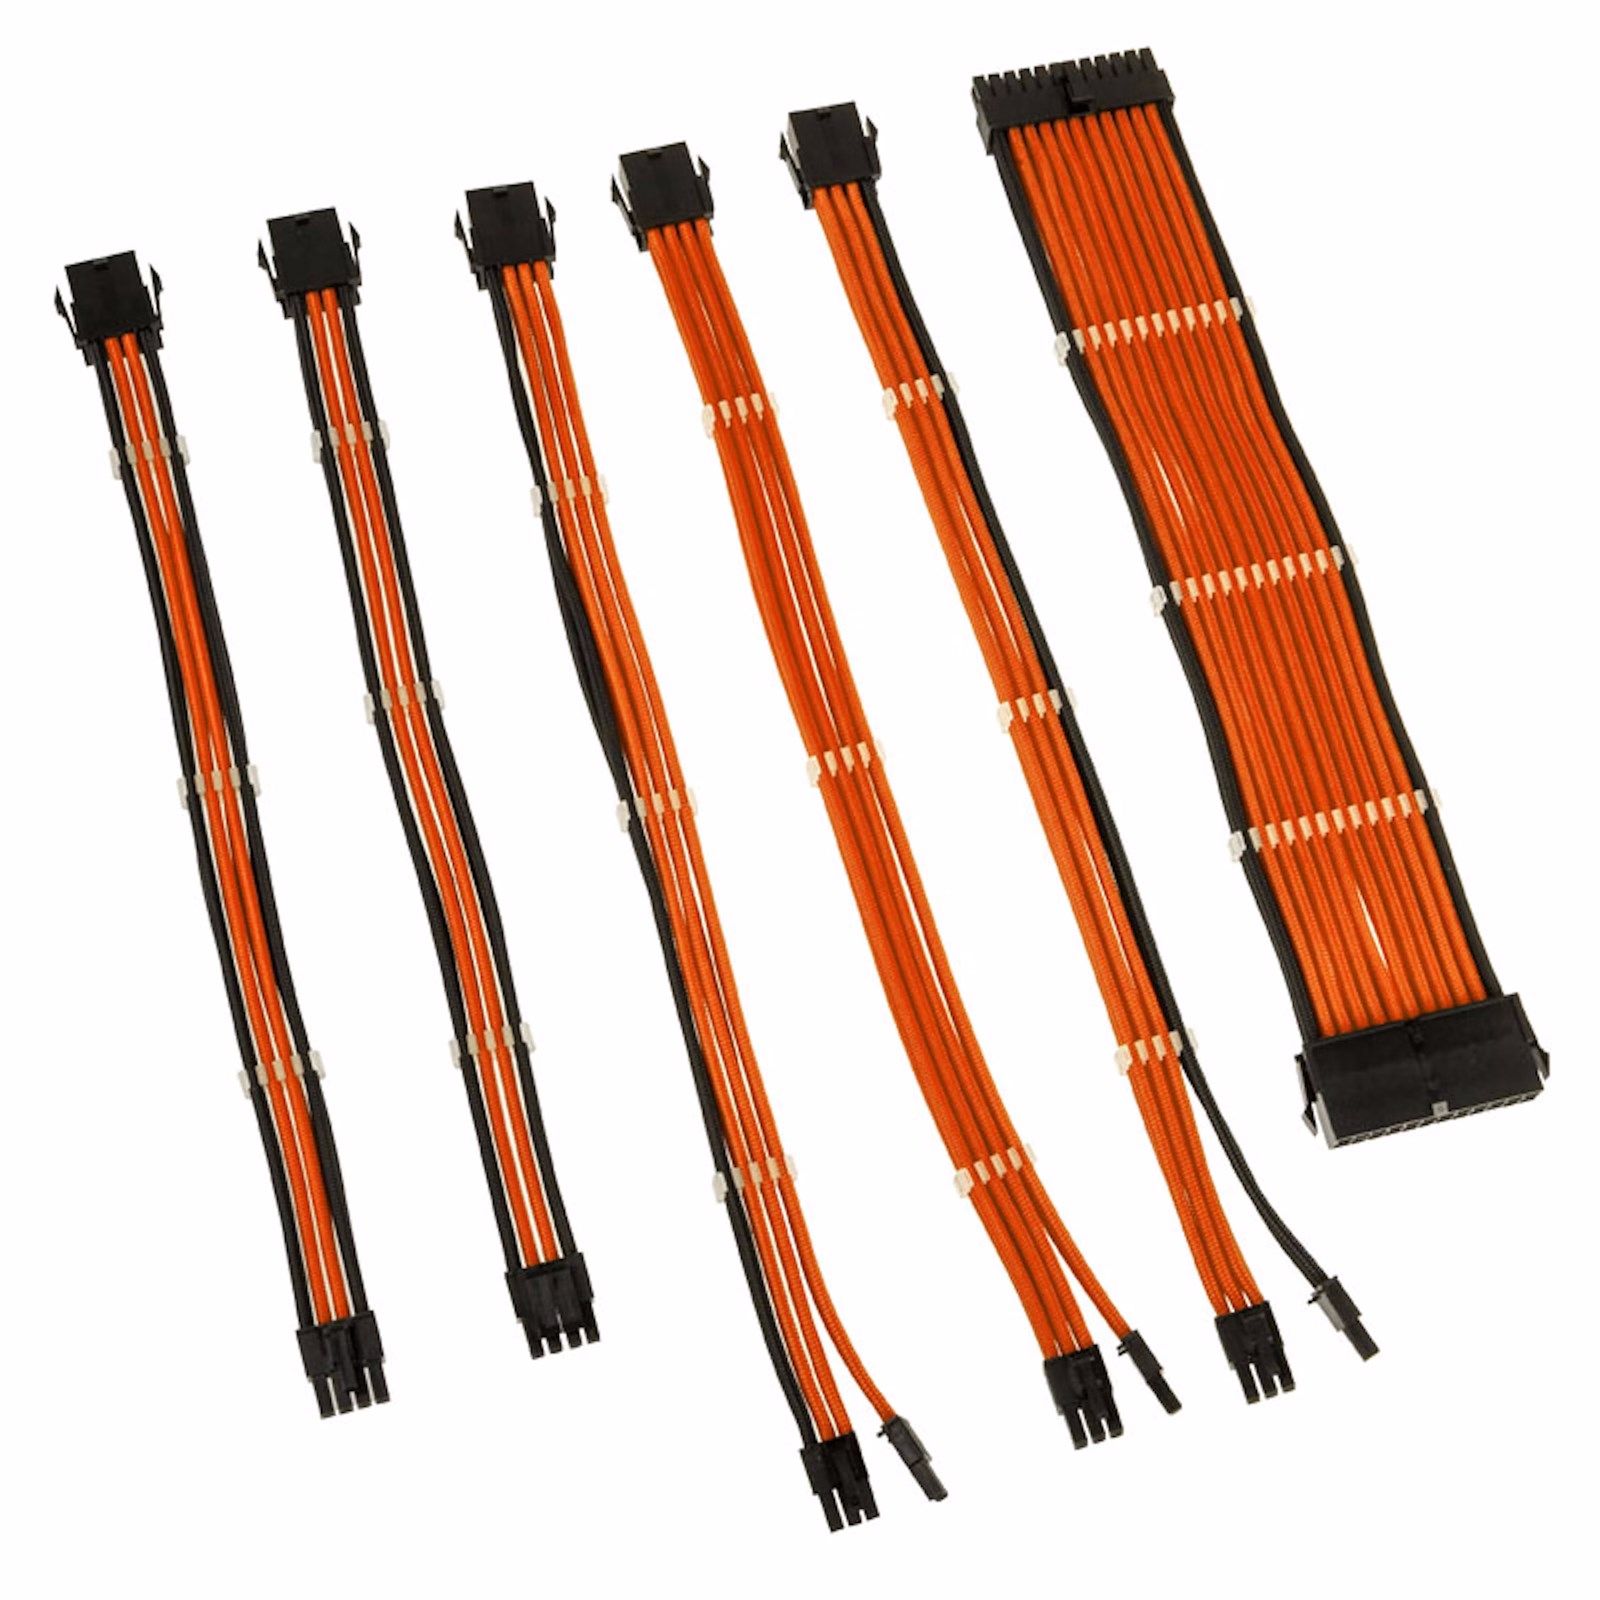 Photos - Other Components Kolink Core Adept Braided Cable Extension Kit in Flame Orange COREADEPT-EK 